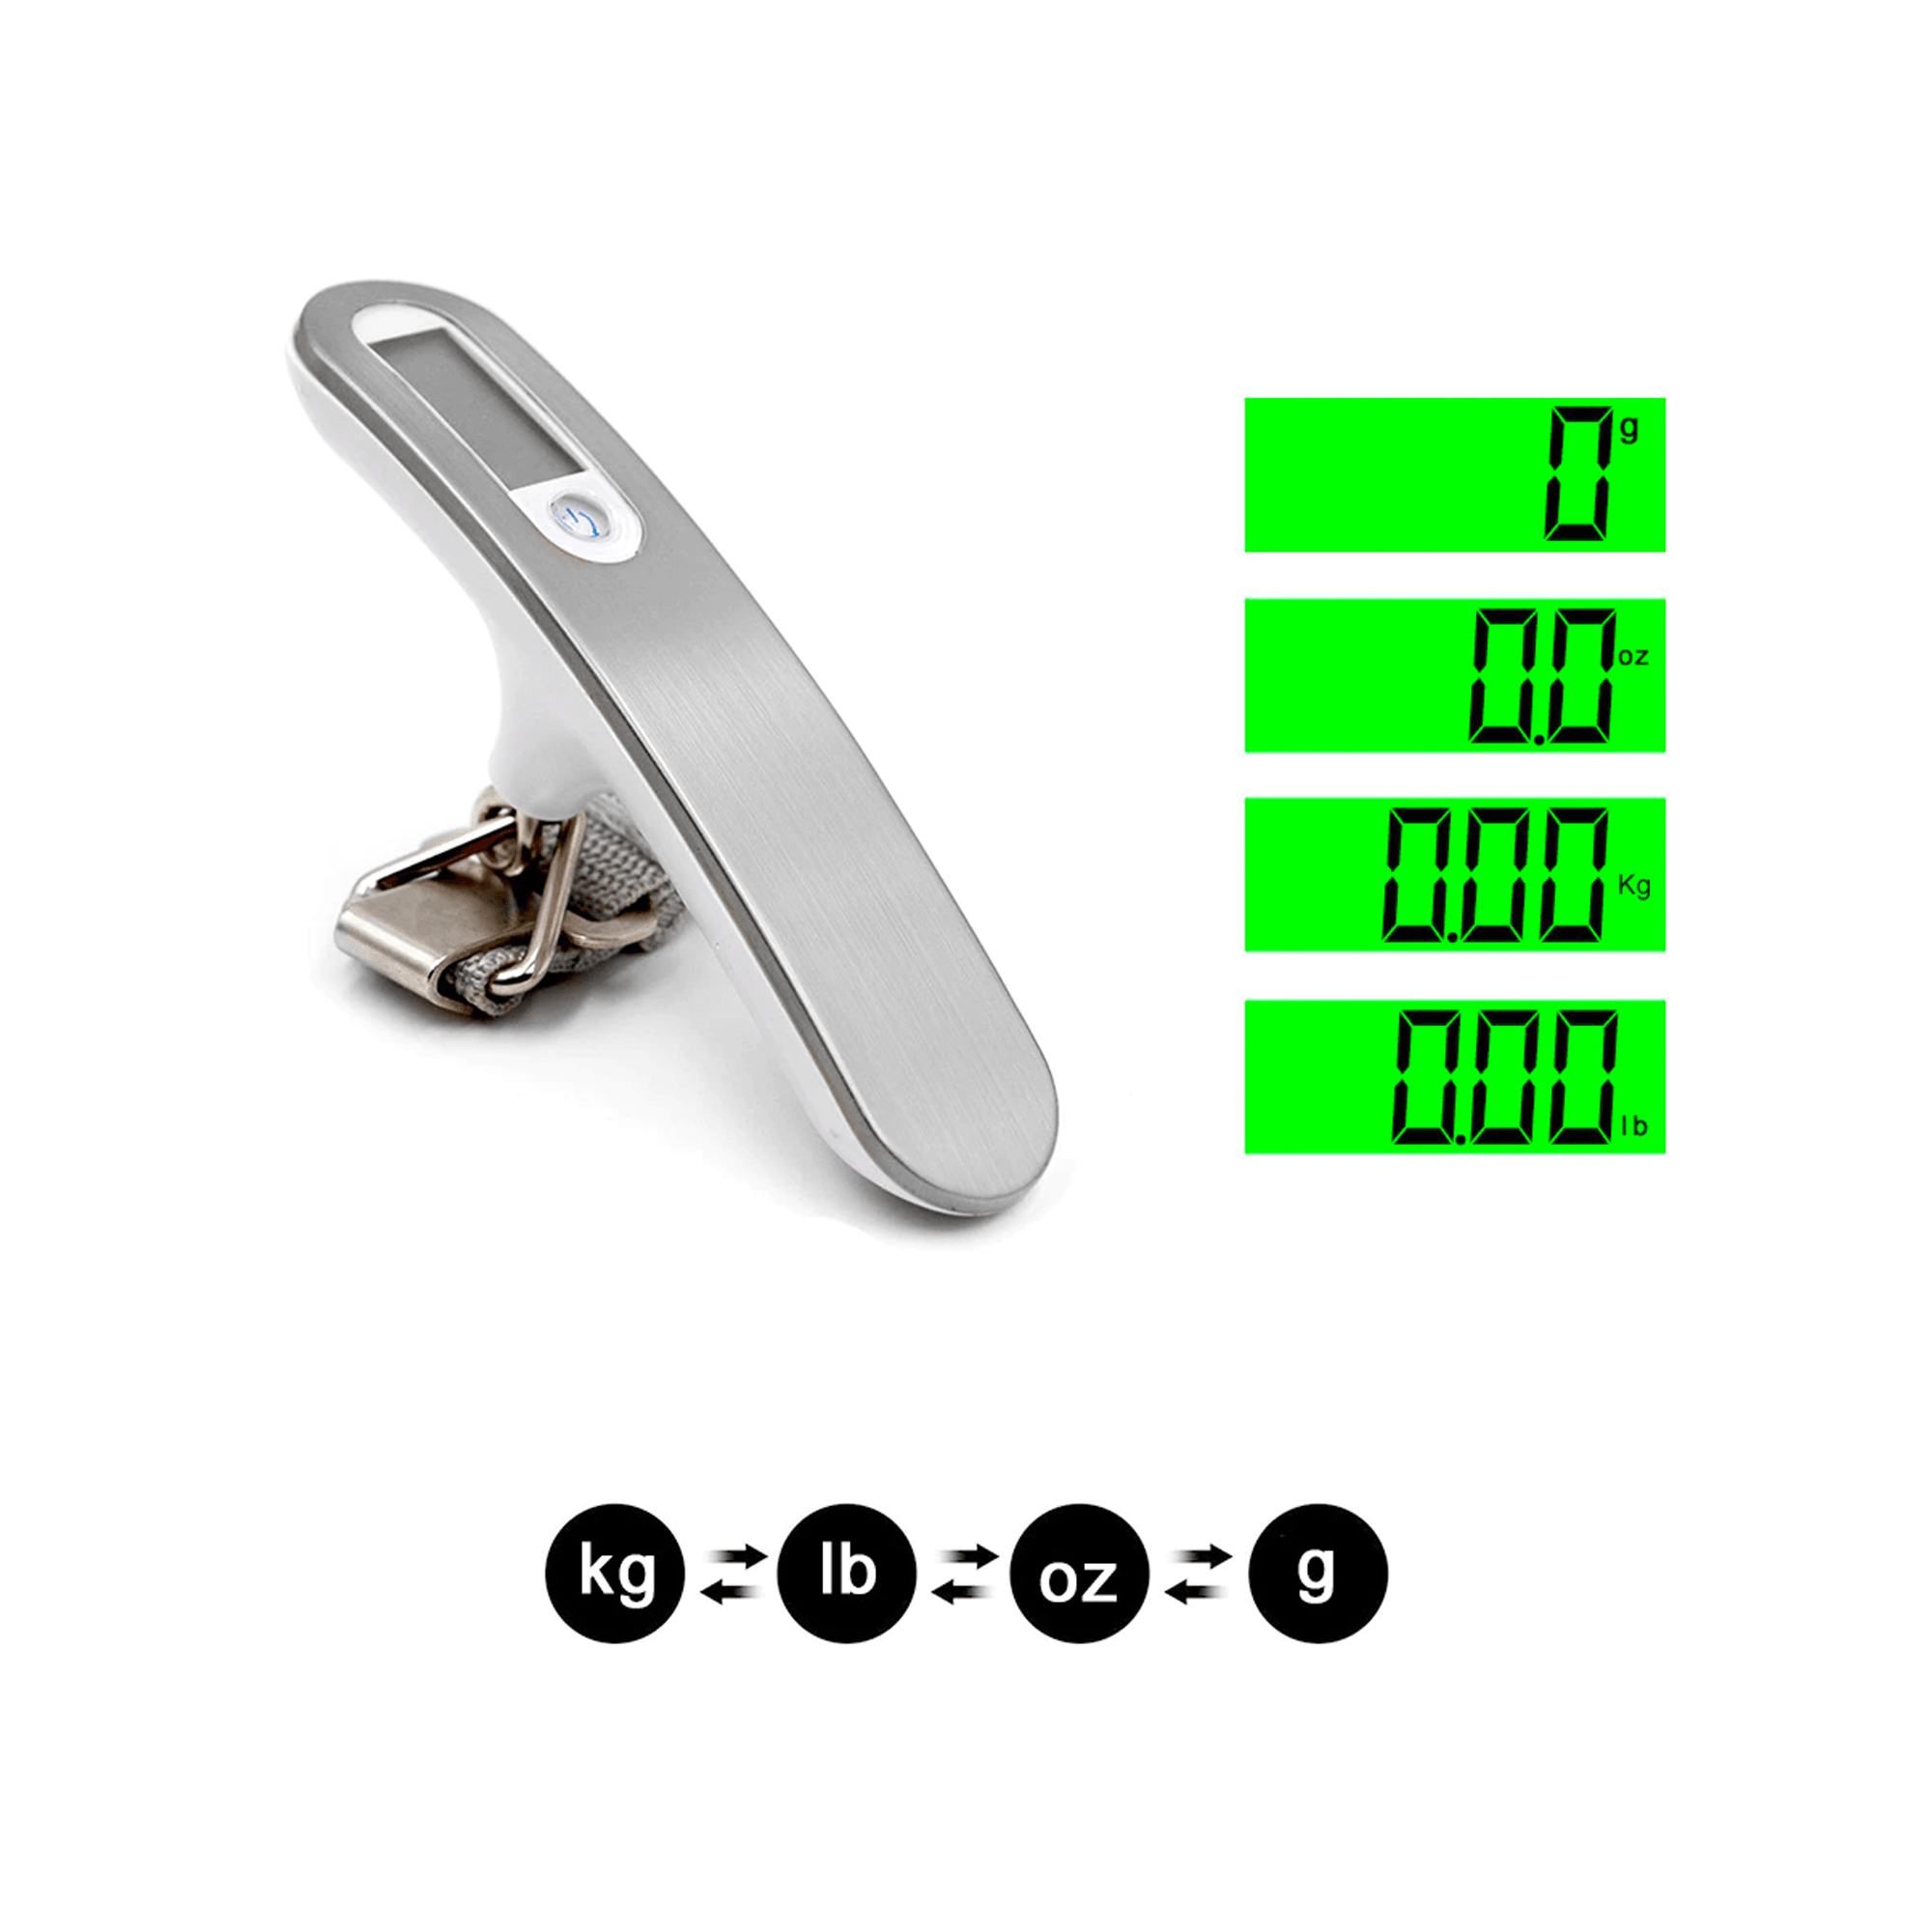 Digital Luggage Scale - San Michelle Bags suitcase nz